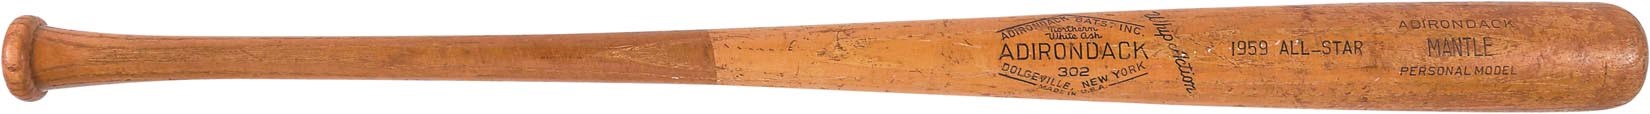 Mantle and Maris - 1959 Mickey Mantle All-Star Game Used Bat (PSA/DNA LOA)